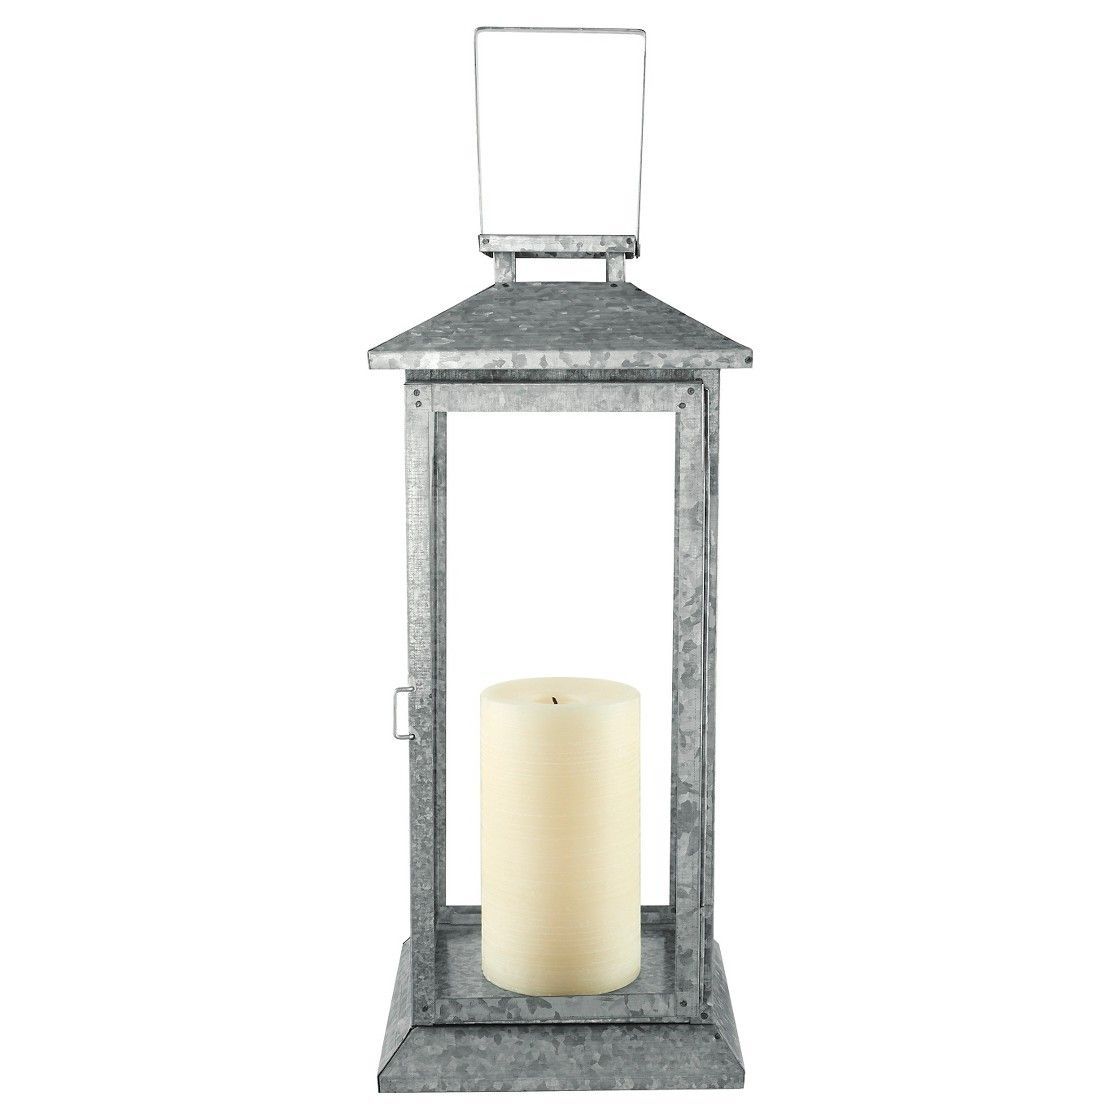 Outdoor Lanterns From Threshold At Target | Outdoorspaces Within Outdoor Lanterns At Target (View 14 of 20)